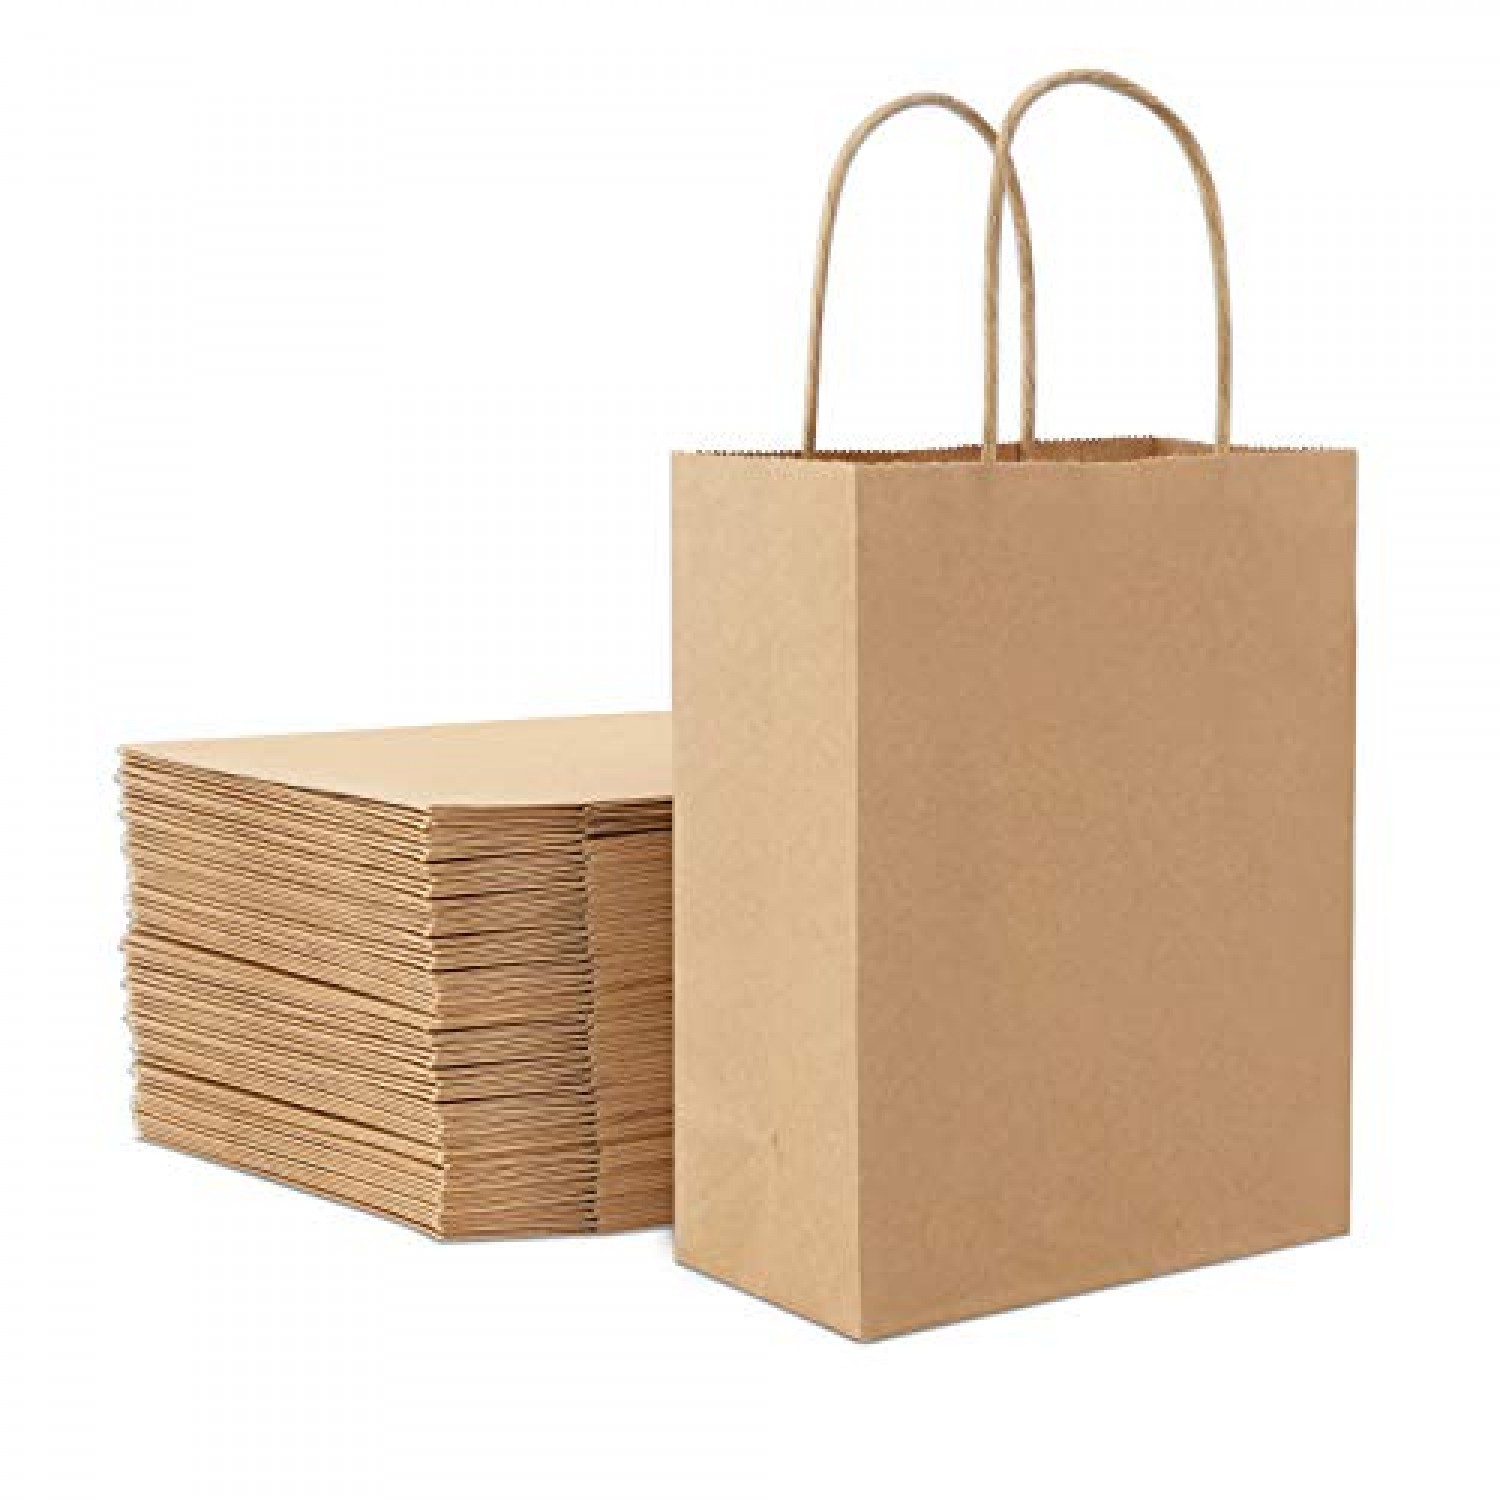 Wedding Gift Bags Kraft Retail Merchandise Bags Eusoar 8x3x13 20Pcs Paper Bags for Clothes Large Kraft Gift Bags Party Bags Kraft Craft Paper Gift Bags with Ribbon Handle Bulk Shopping Bags 